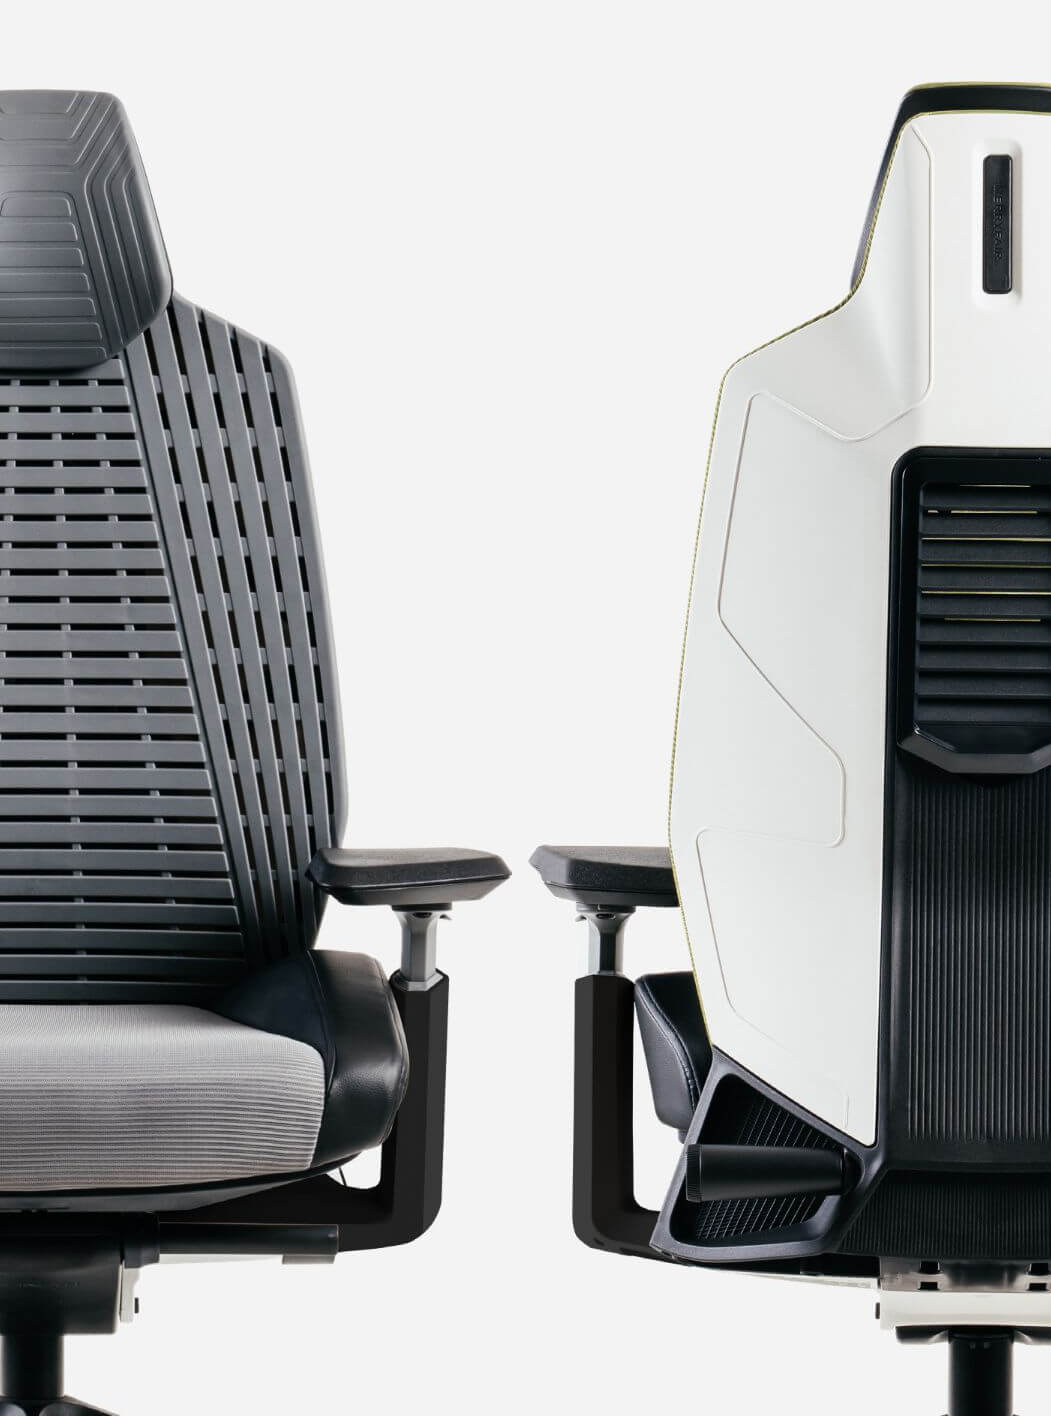 The Ronin ergonomic gaming chair lets you perform at your best.